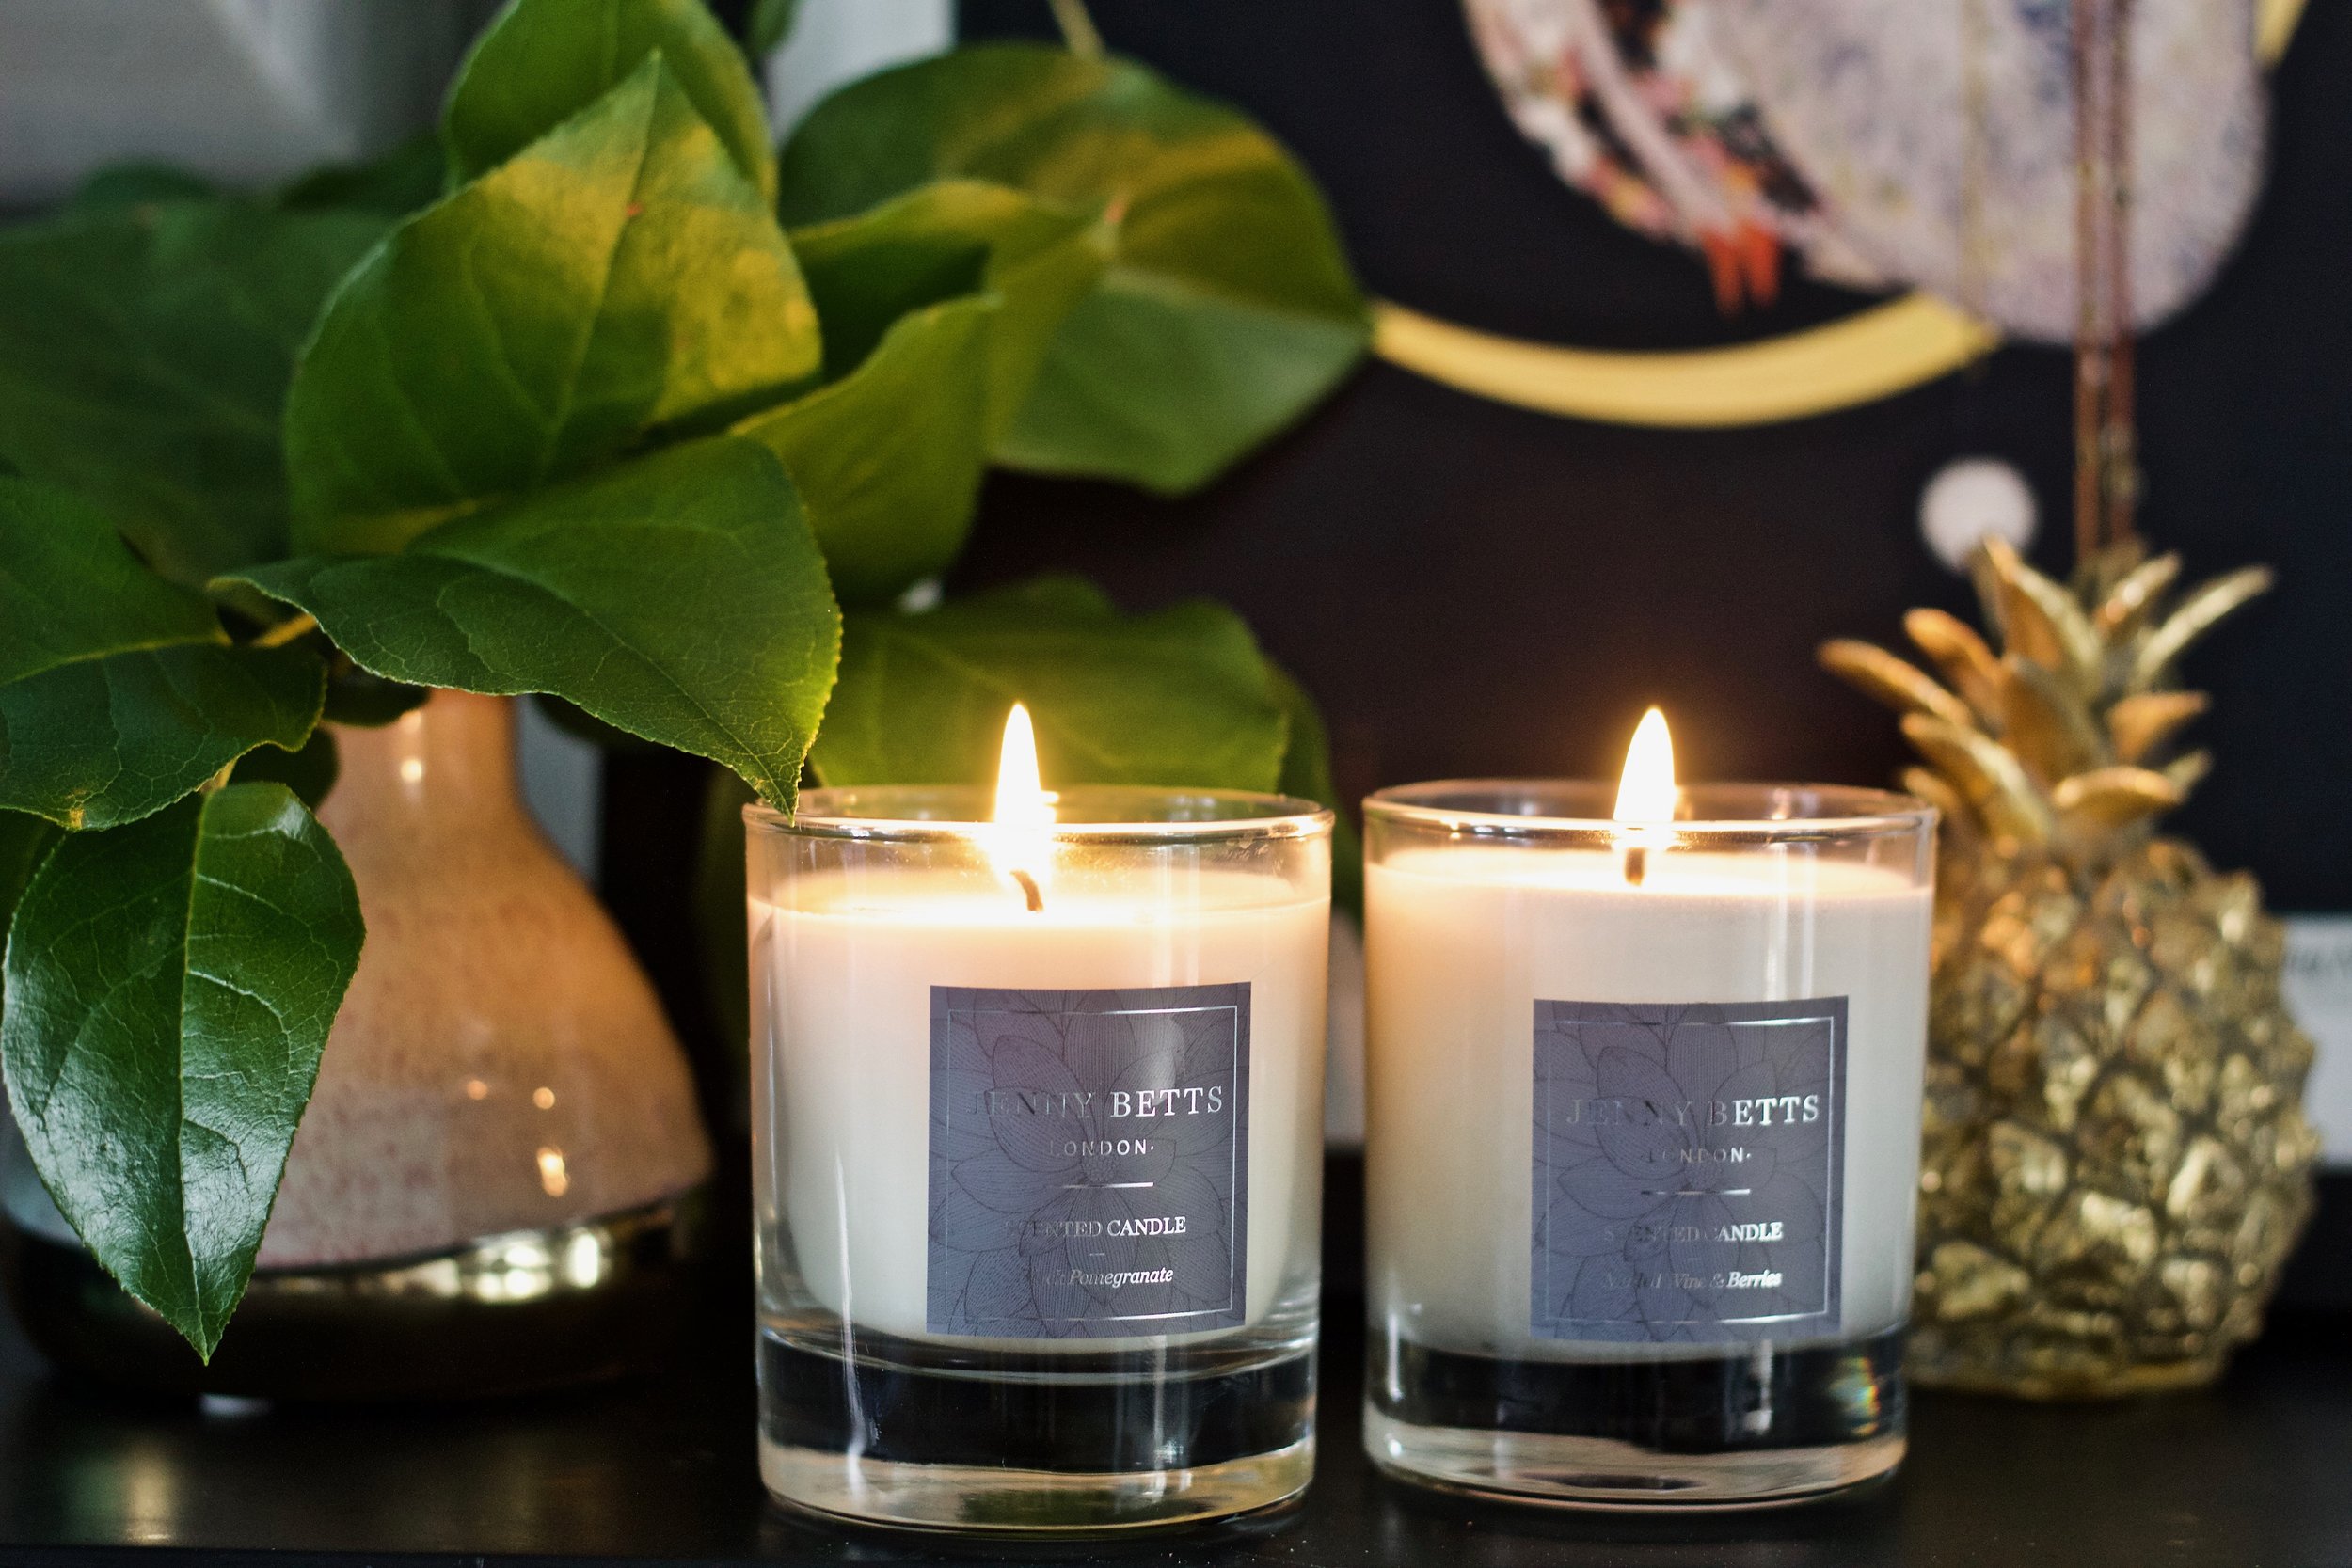 Jenny Betts London fragrances and candles in Battersea South West London 3.jpg